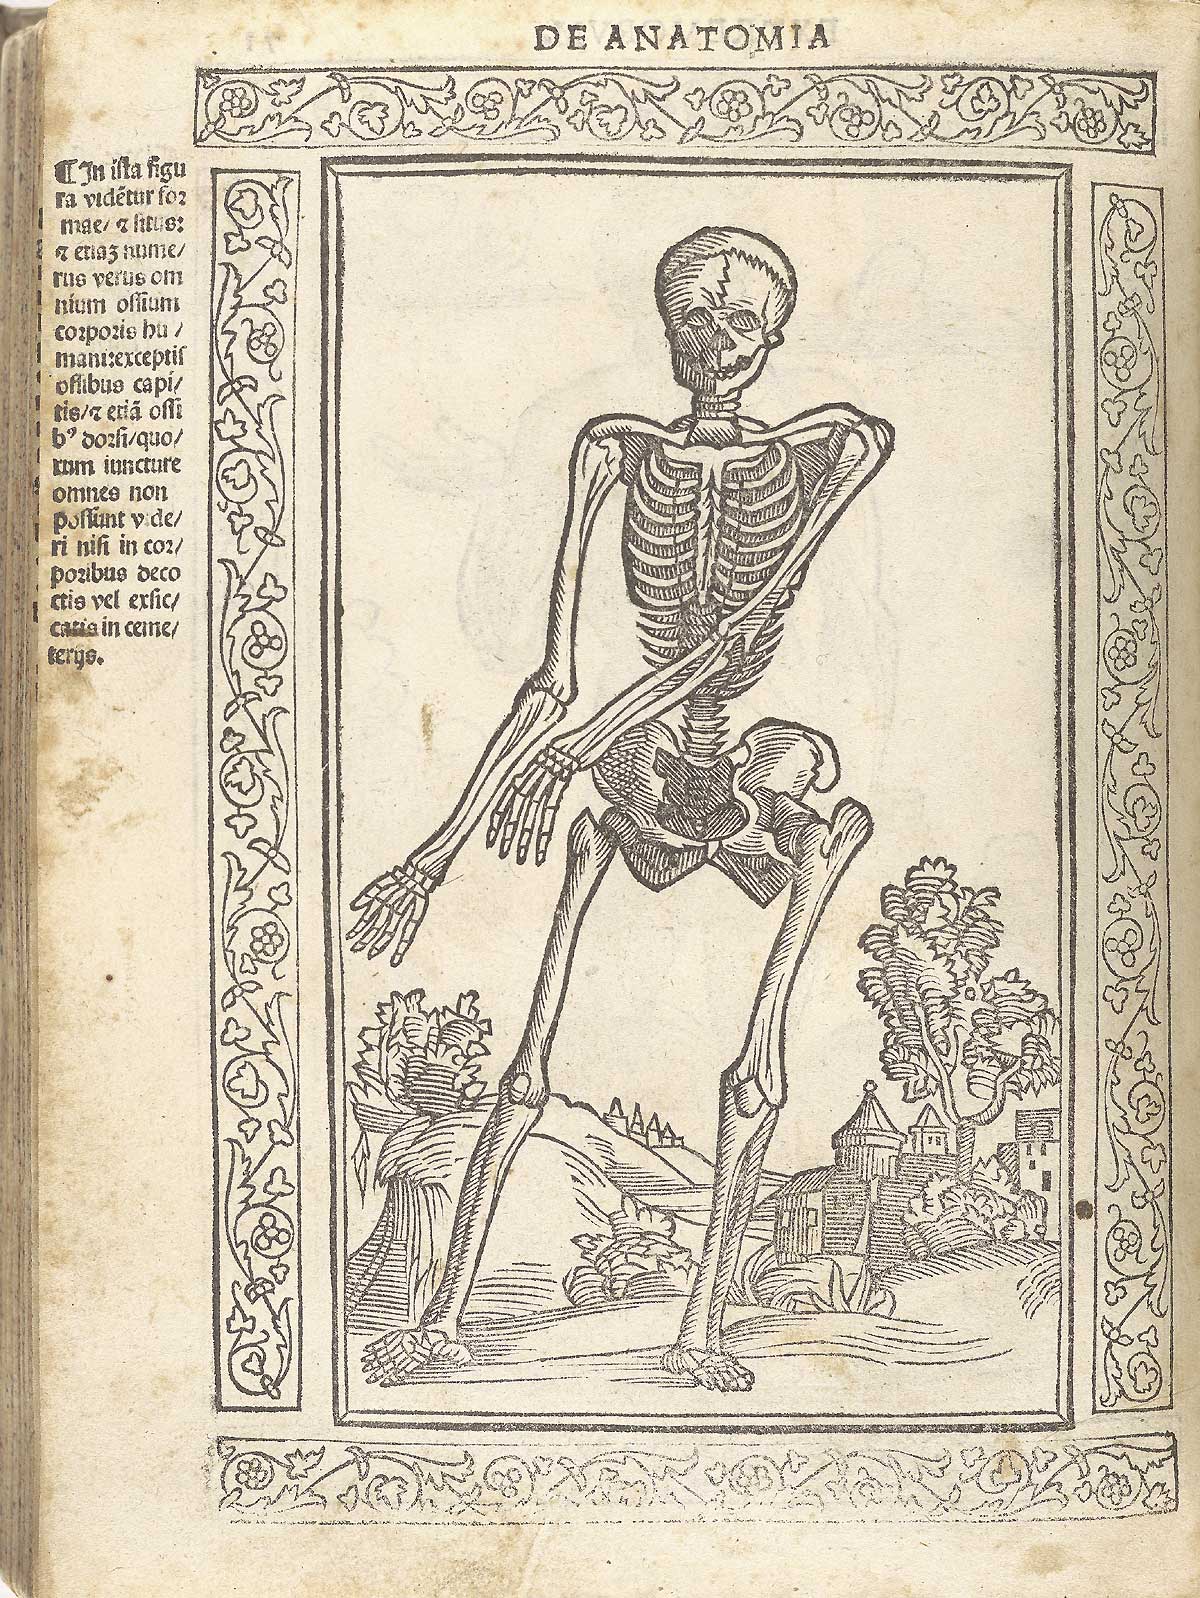 Woodcut skeleton figure, facing, with arms stretched down to the left, as if dancing, in a pastoral setting; with a woodcut border and text in Latin on the left side of page, from Berengario da Carpi’s Isagogae breues, Bologna, 1523, NLM Call no. WZ 240 B488i 1523.